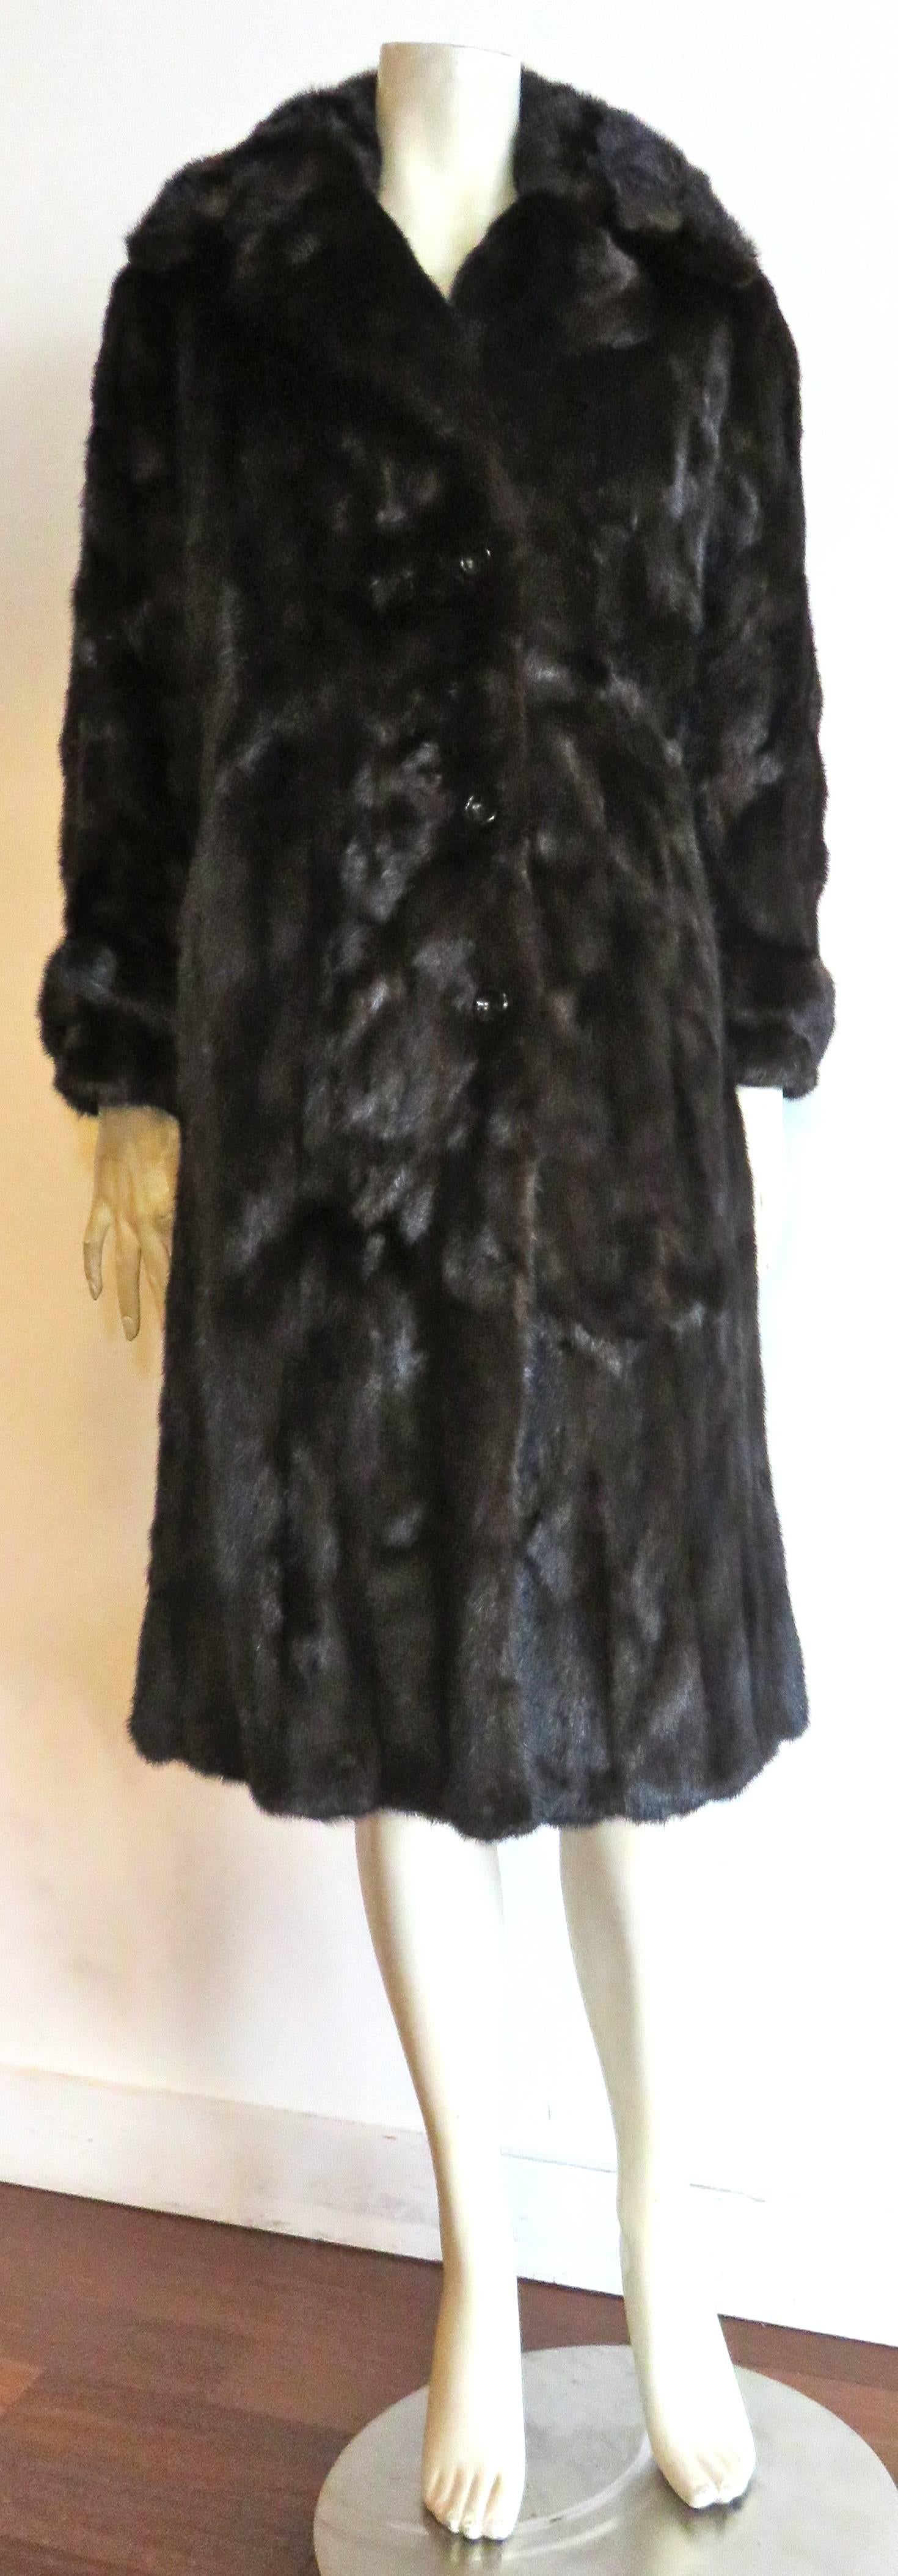 Mint condition, 1960's MINK  FUR COAT.

This genuine, luxurious, dark brown, mink coat looks to have never been worn, and is absolutely stunning.

Slick, polished mink fur with absolutely no flaws.

Fully lined in dark brown silk taffeta with